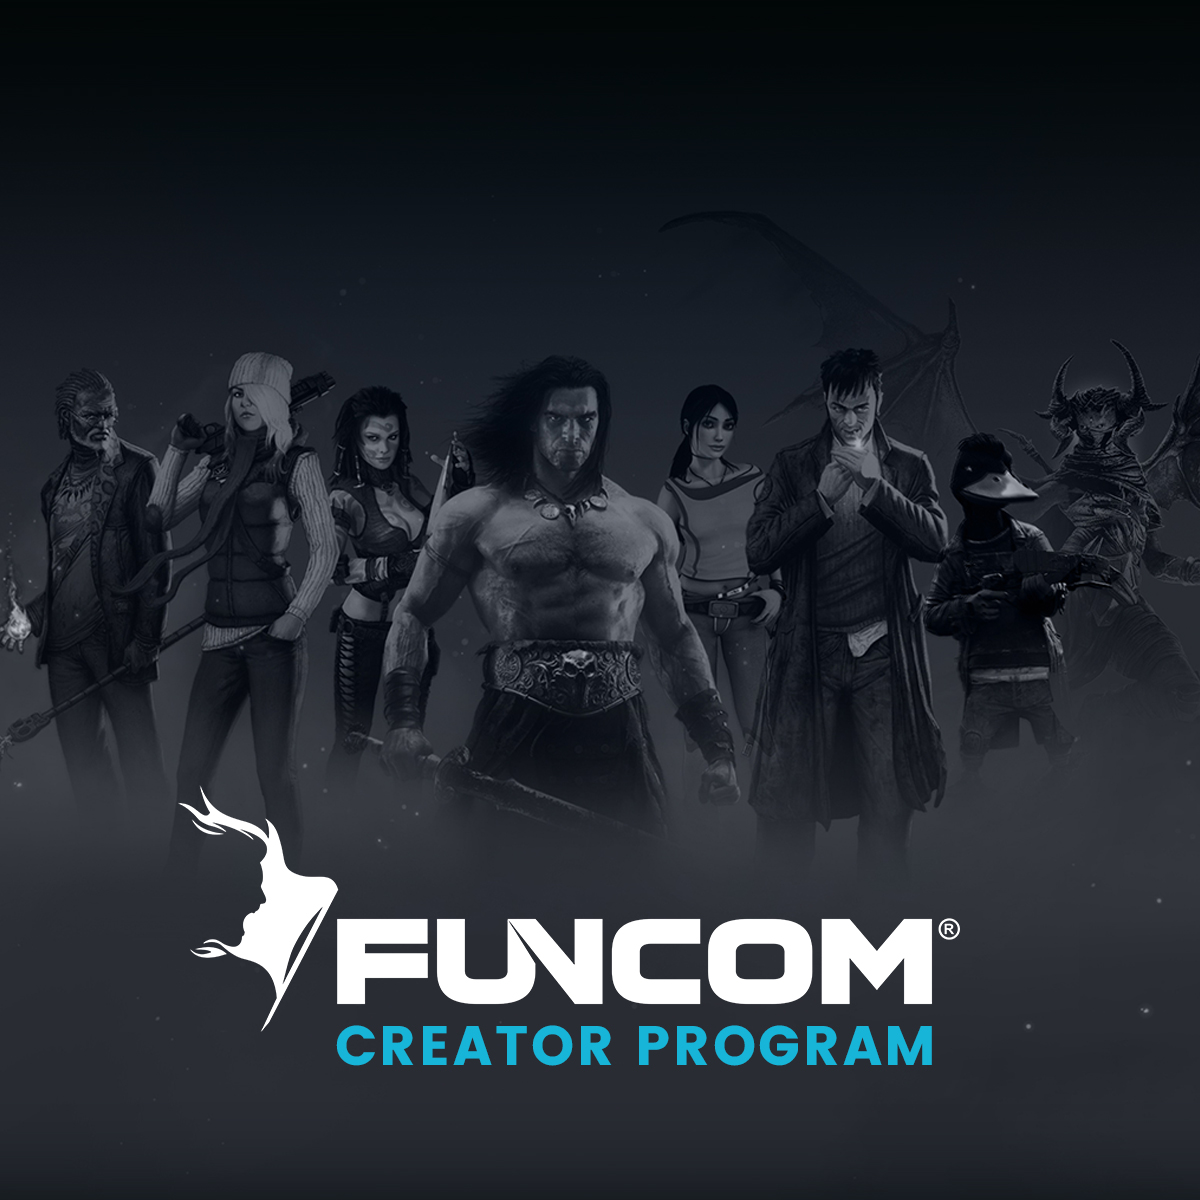 🤘 Attention Hellsingers! 🤘 We invite you to join our newly-launched Funcom Creator Program to unlock benefits that’ll help you on your journey of creating content across the eight Hells. Learn more: creators.funcom.com #FuncomCreators